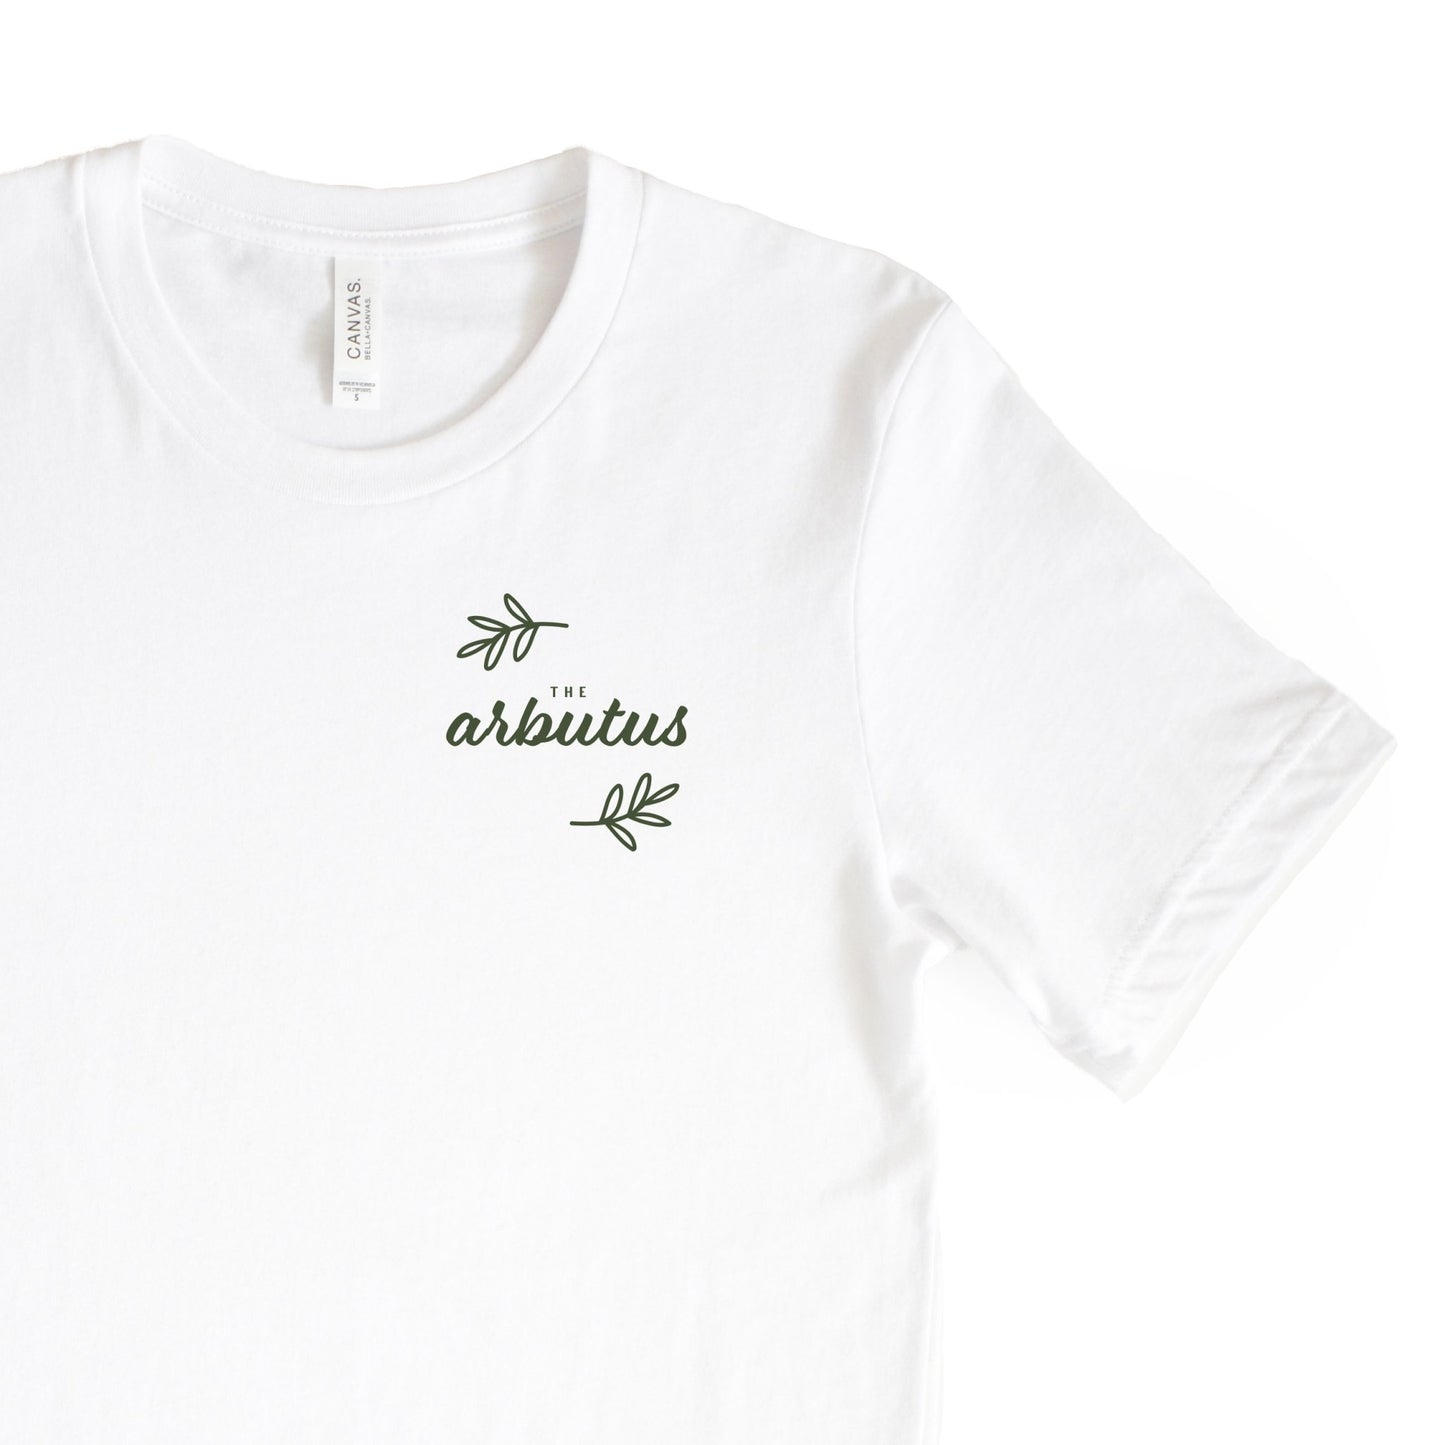 Arbutus Logo Tee - Officially Licensed Queen's Cove Series - Dark Midnight Design Co